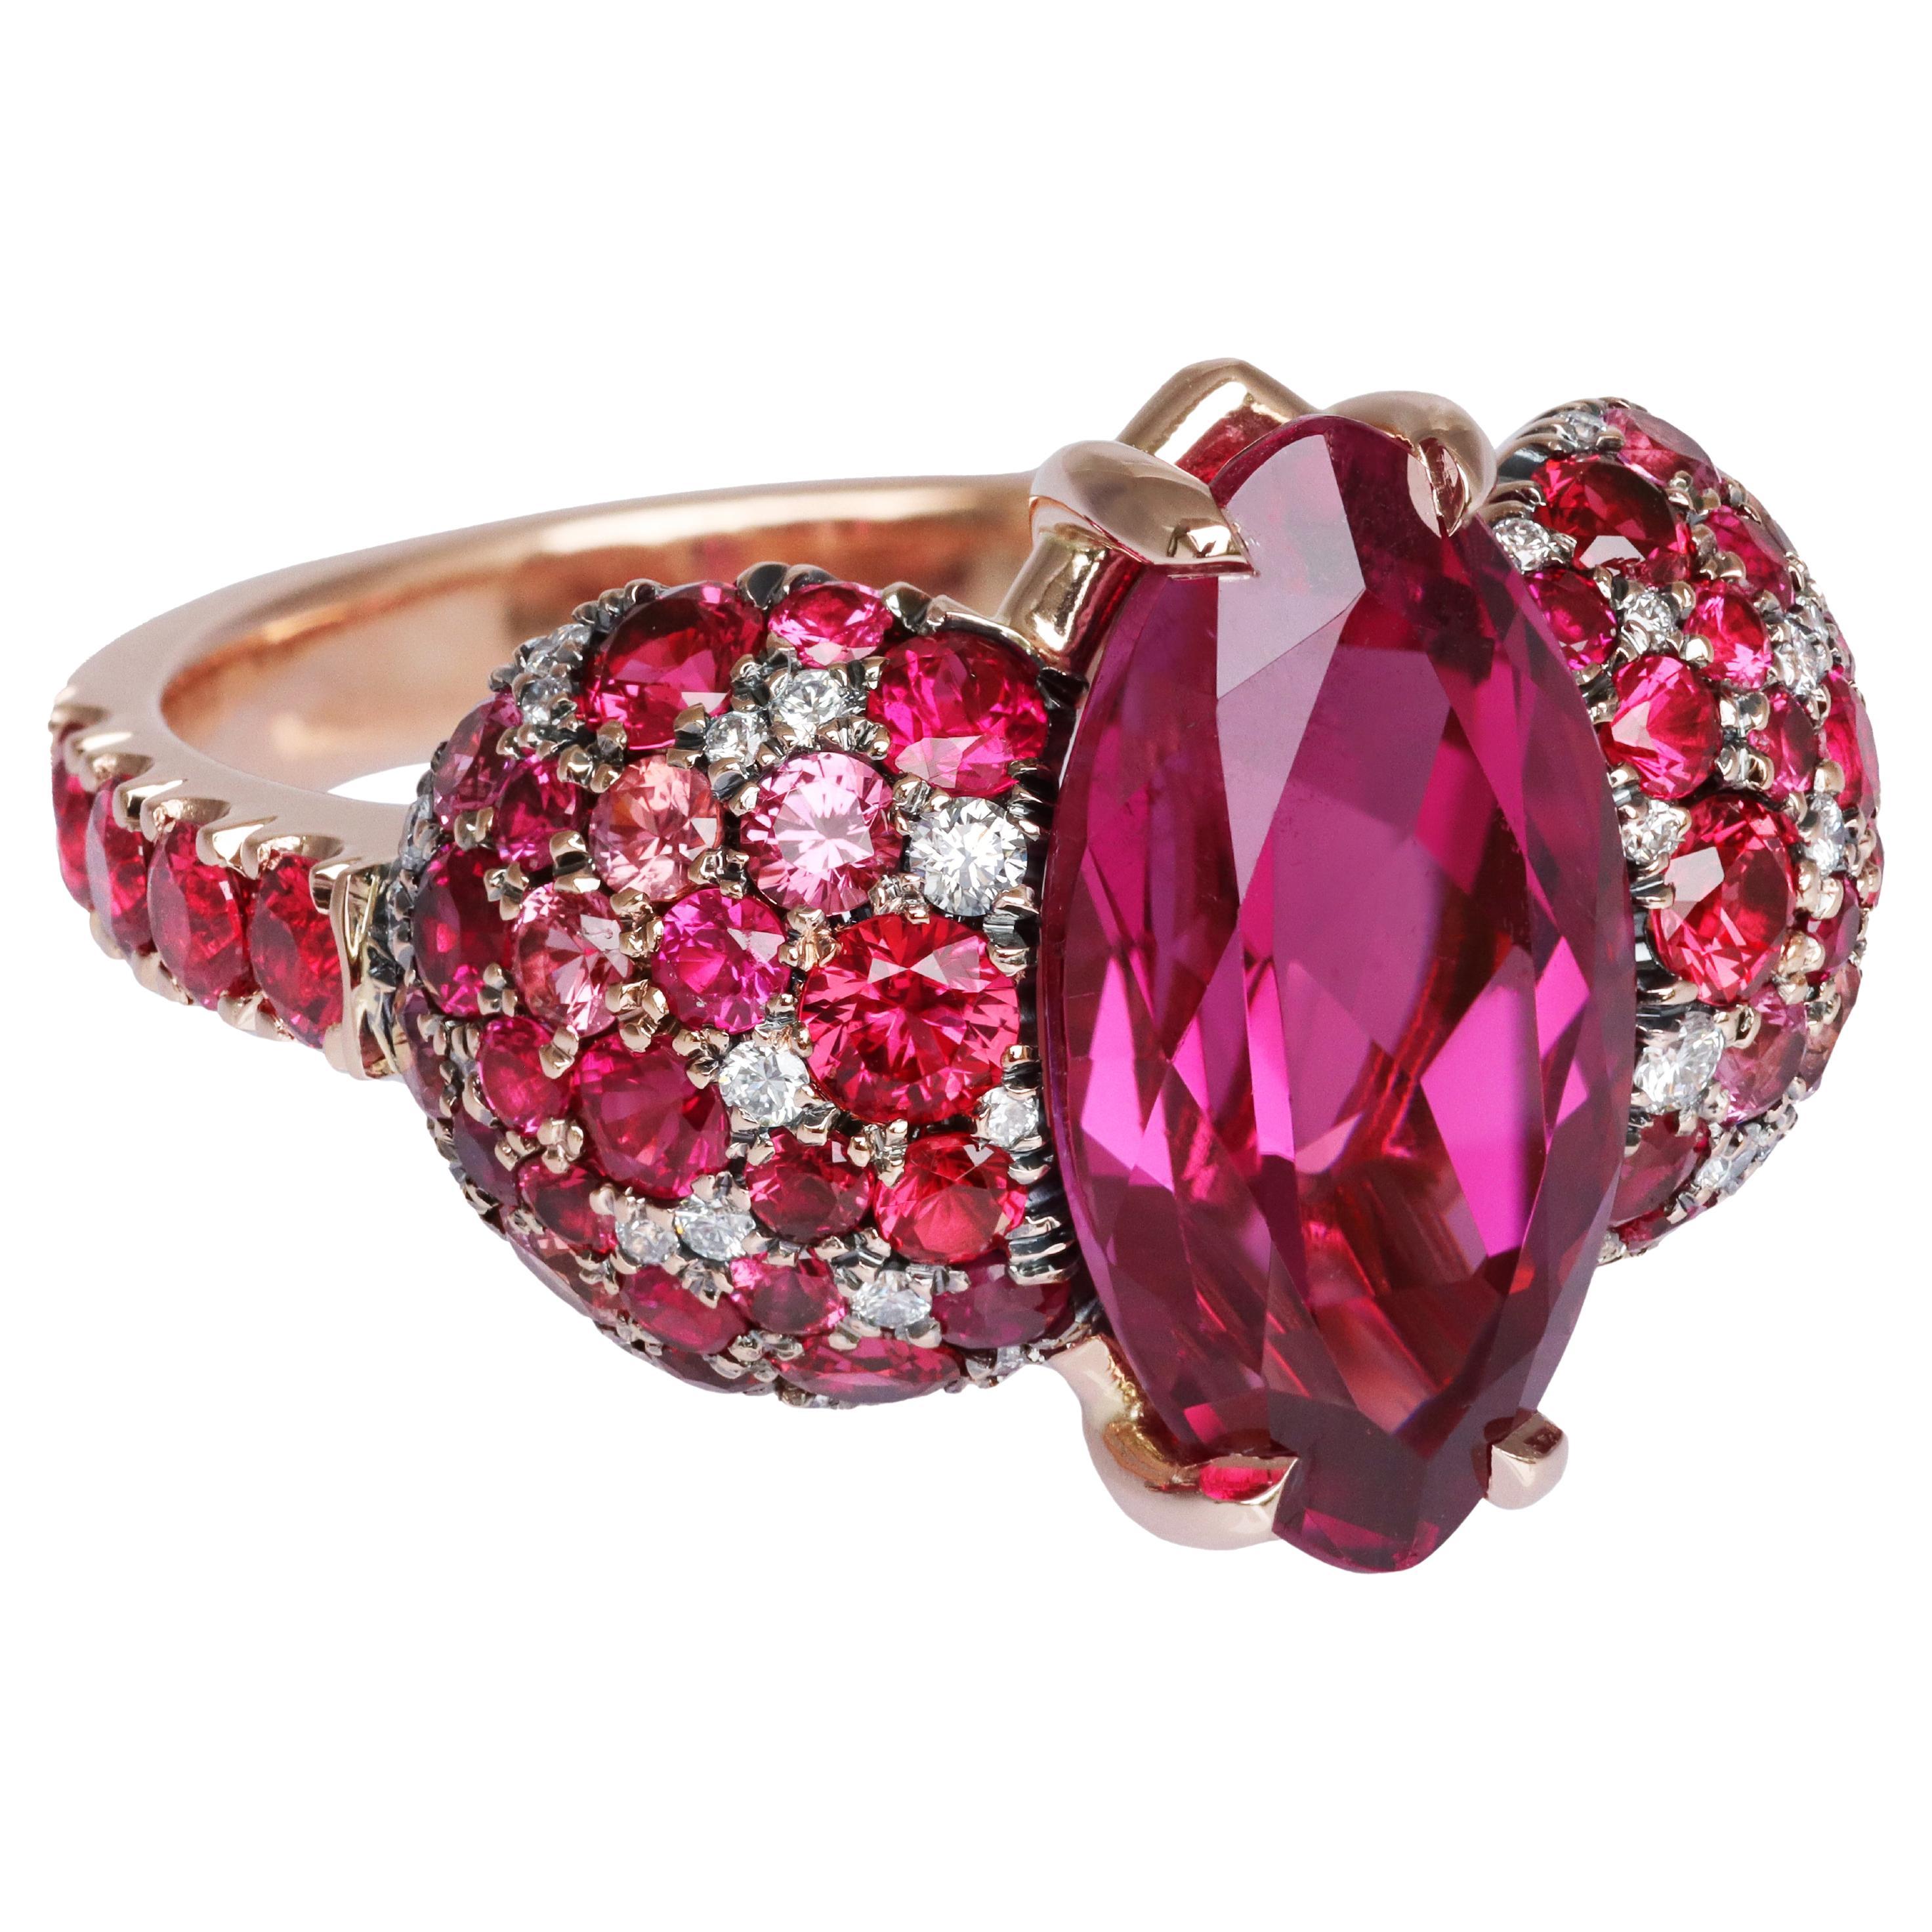 Joke Quick Rubellite Ruby Red Spinel Padparadscha Sapphire Coctail Ring